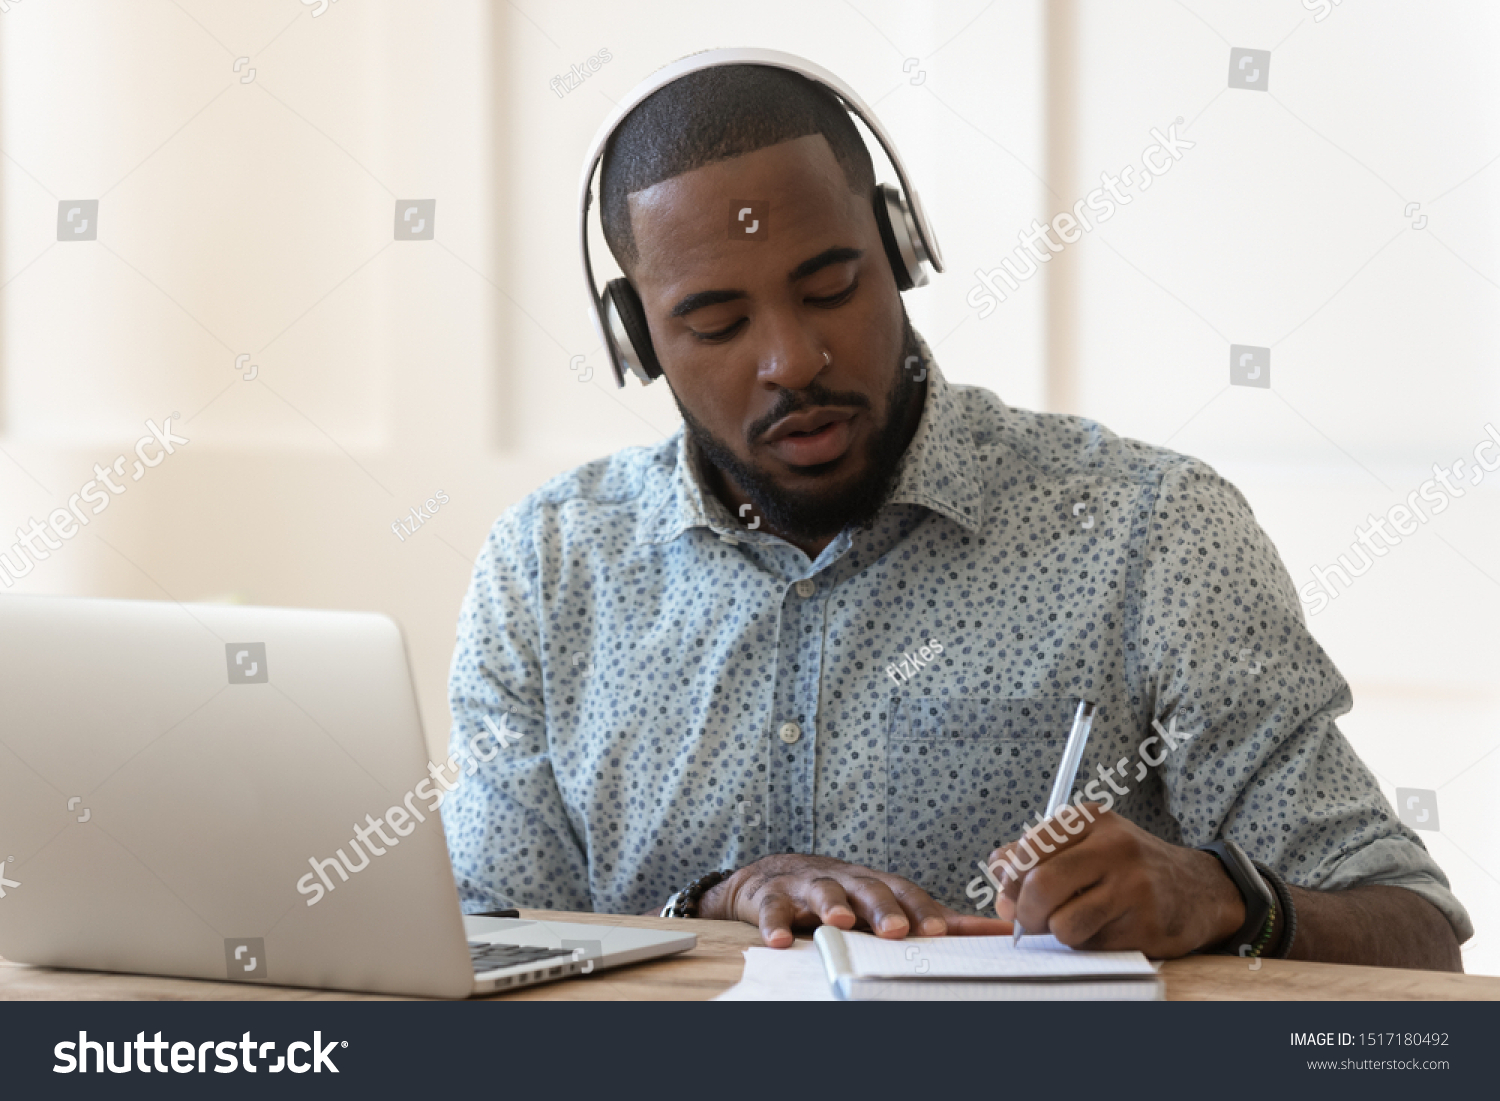 Focused african student sit at desk wearing wireless headphones learning preparing for seminar or exam, guy interpreter hears audio writing down translation, online lecture course e-learning concept #1517180492